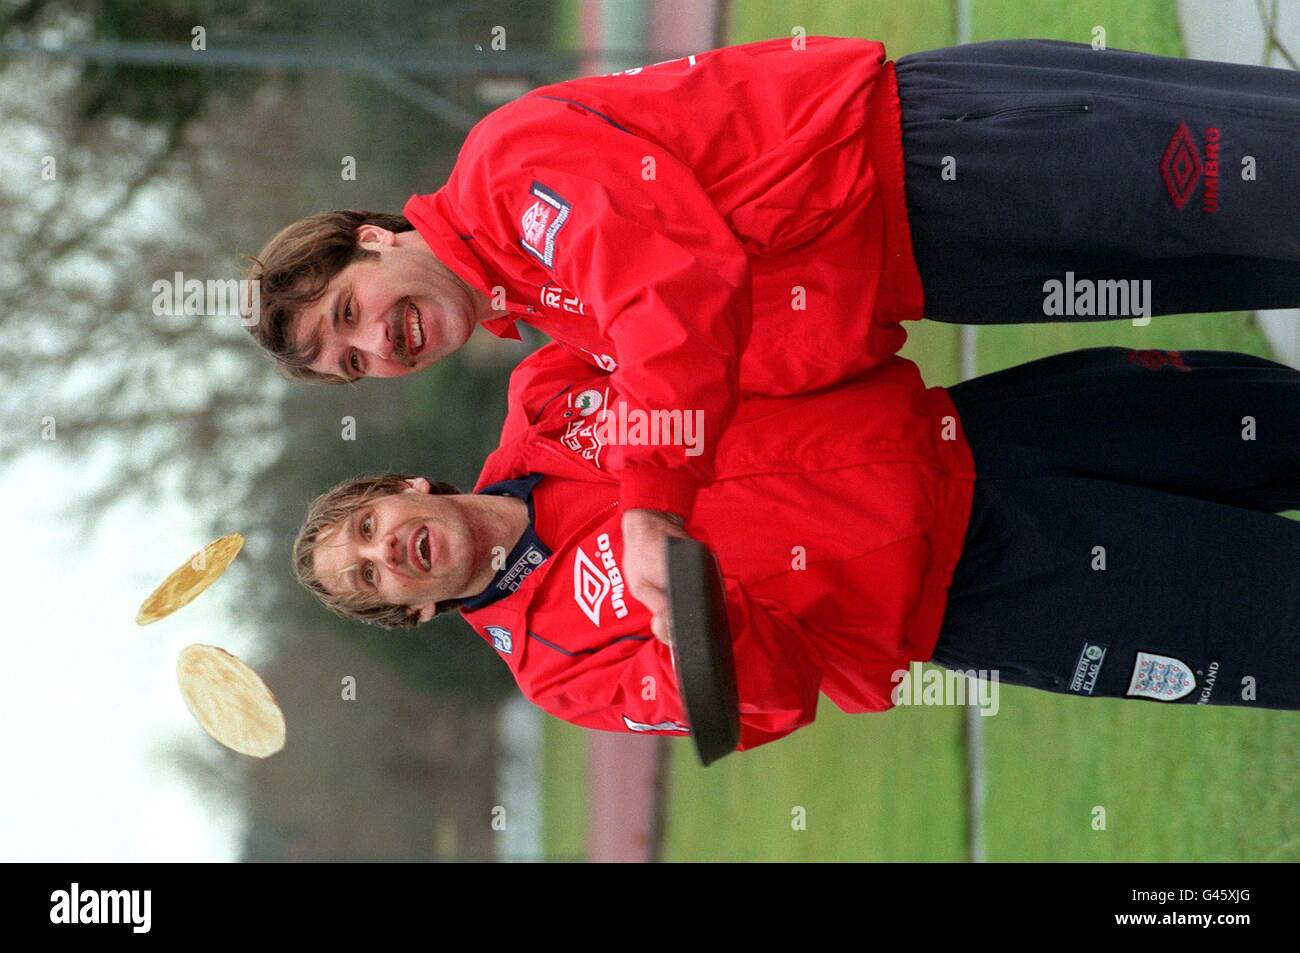 Arsenal team mates Paul Merson (left) and David Seaman practice their pancake-tossing techniques for tomorrow (Shrove Tuesday) during a break in training for the England squad at Bisham Abbey this afternoon (Monday). The team meet Italy at Wembley this Wednesday for a World Cup qualifier. Photo by Fiona Hanson/PA. Stock Photo